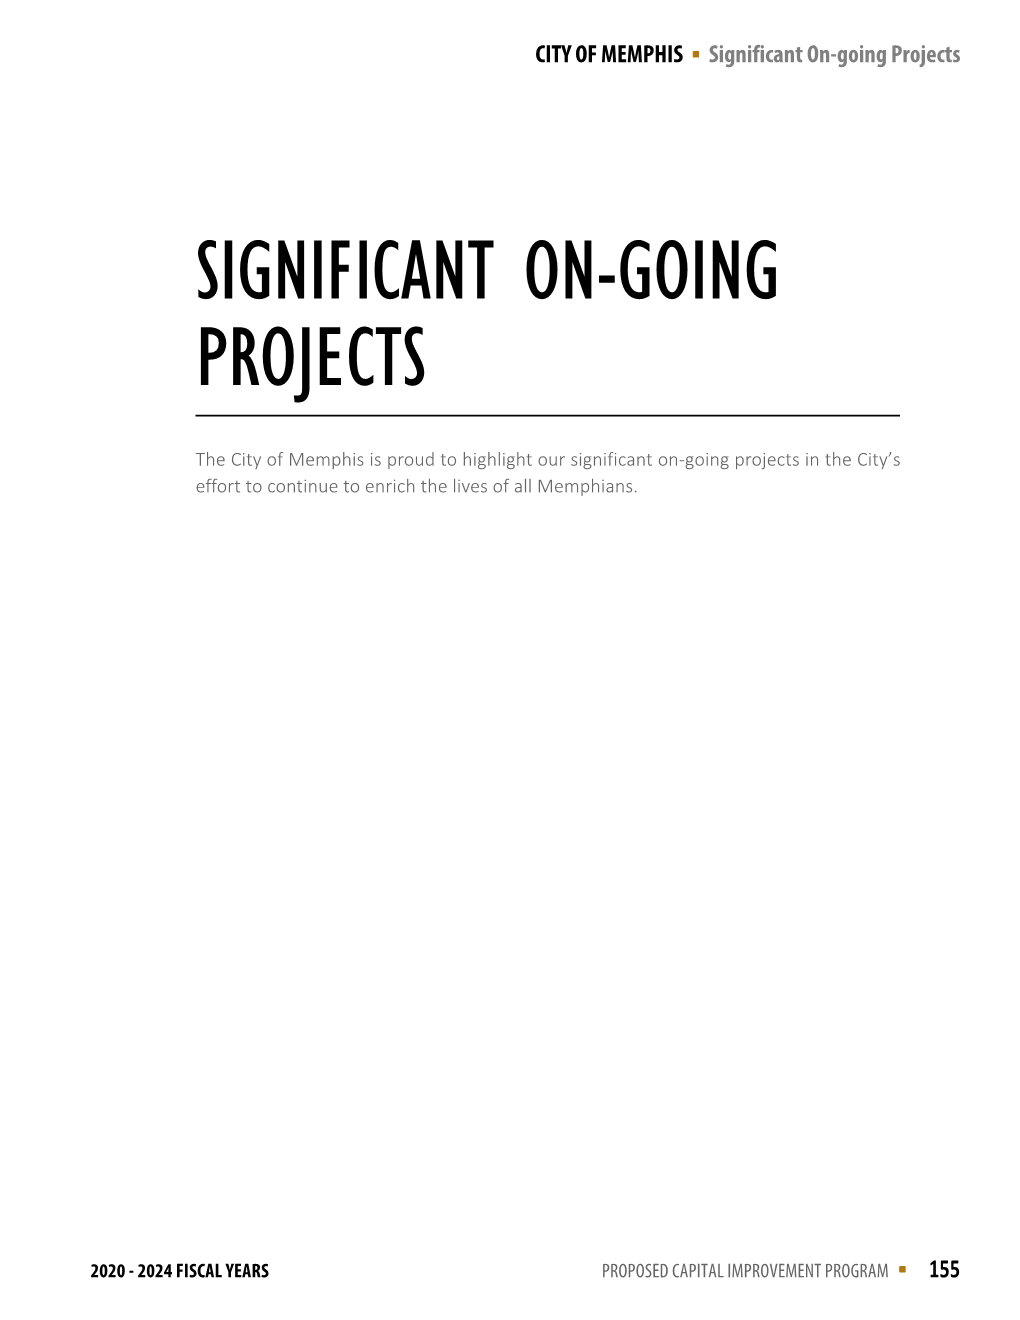 Significant On-Going Projects